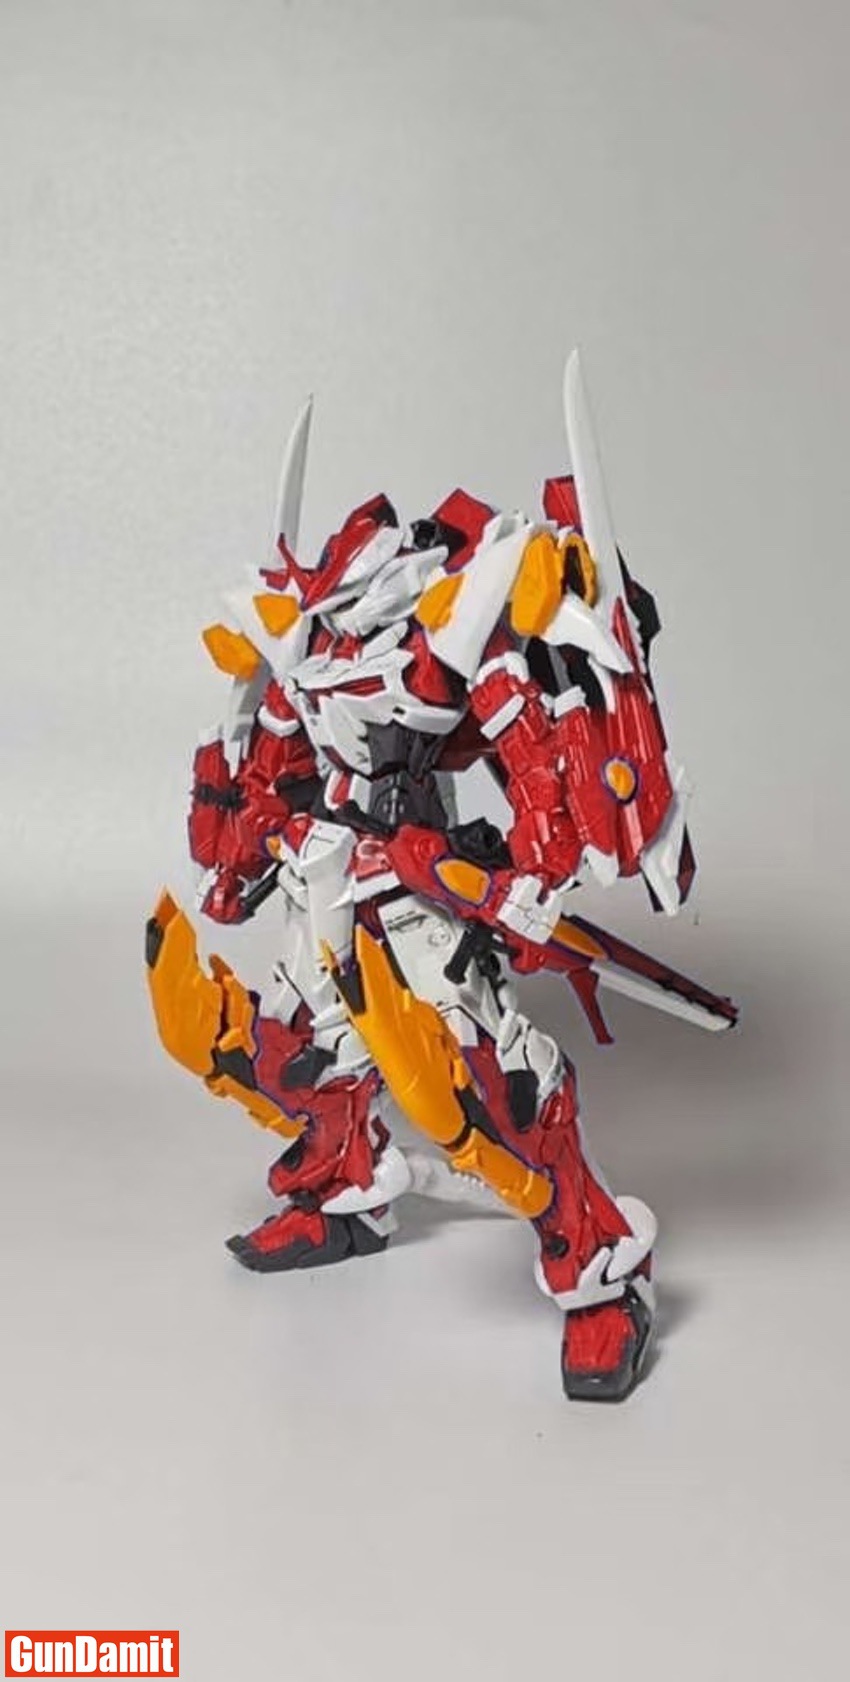 MG 1/100 MBF ASTRAY RED FRAME Gundam Model Kit Water Decal 